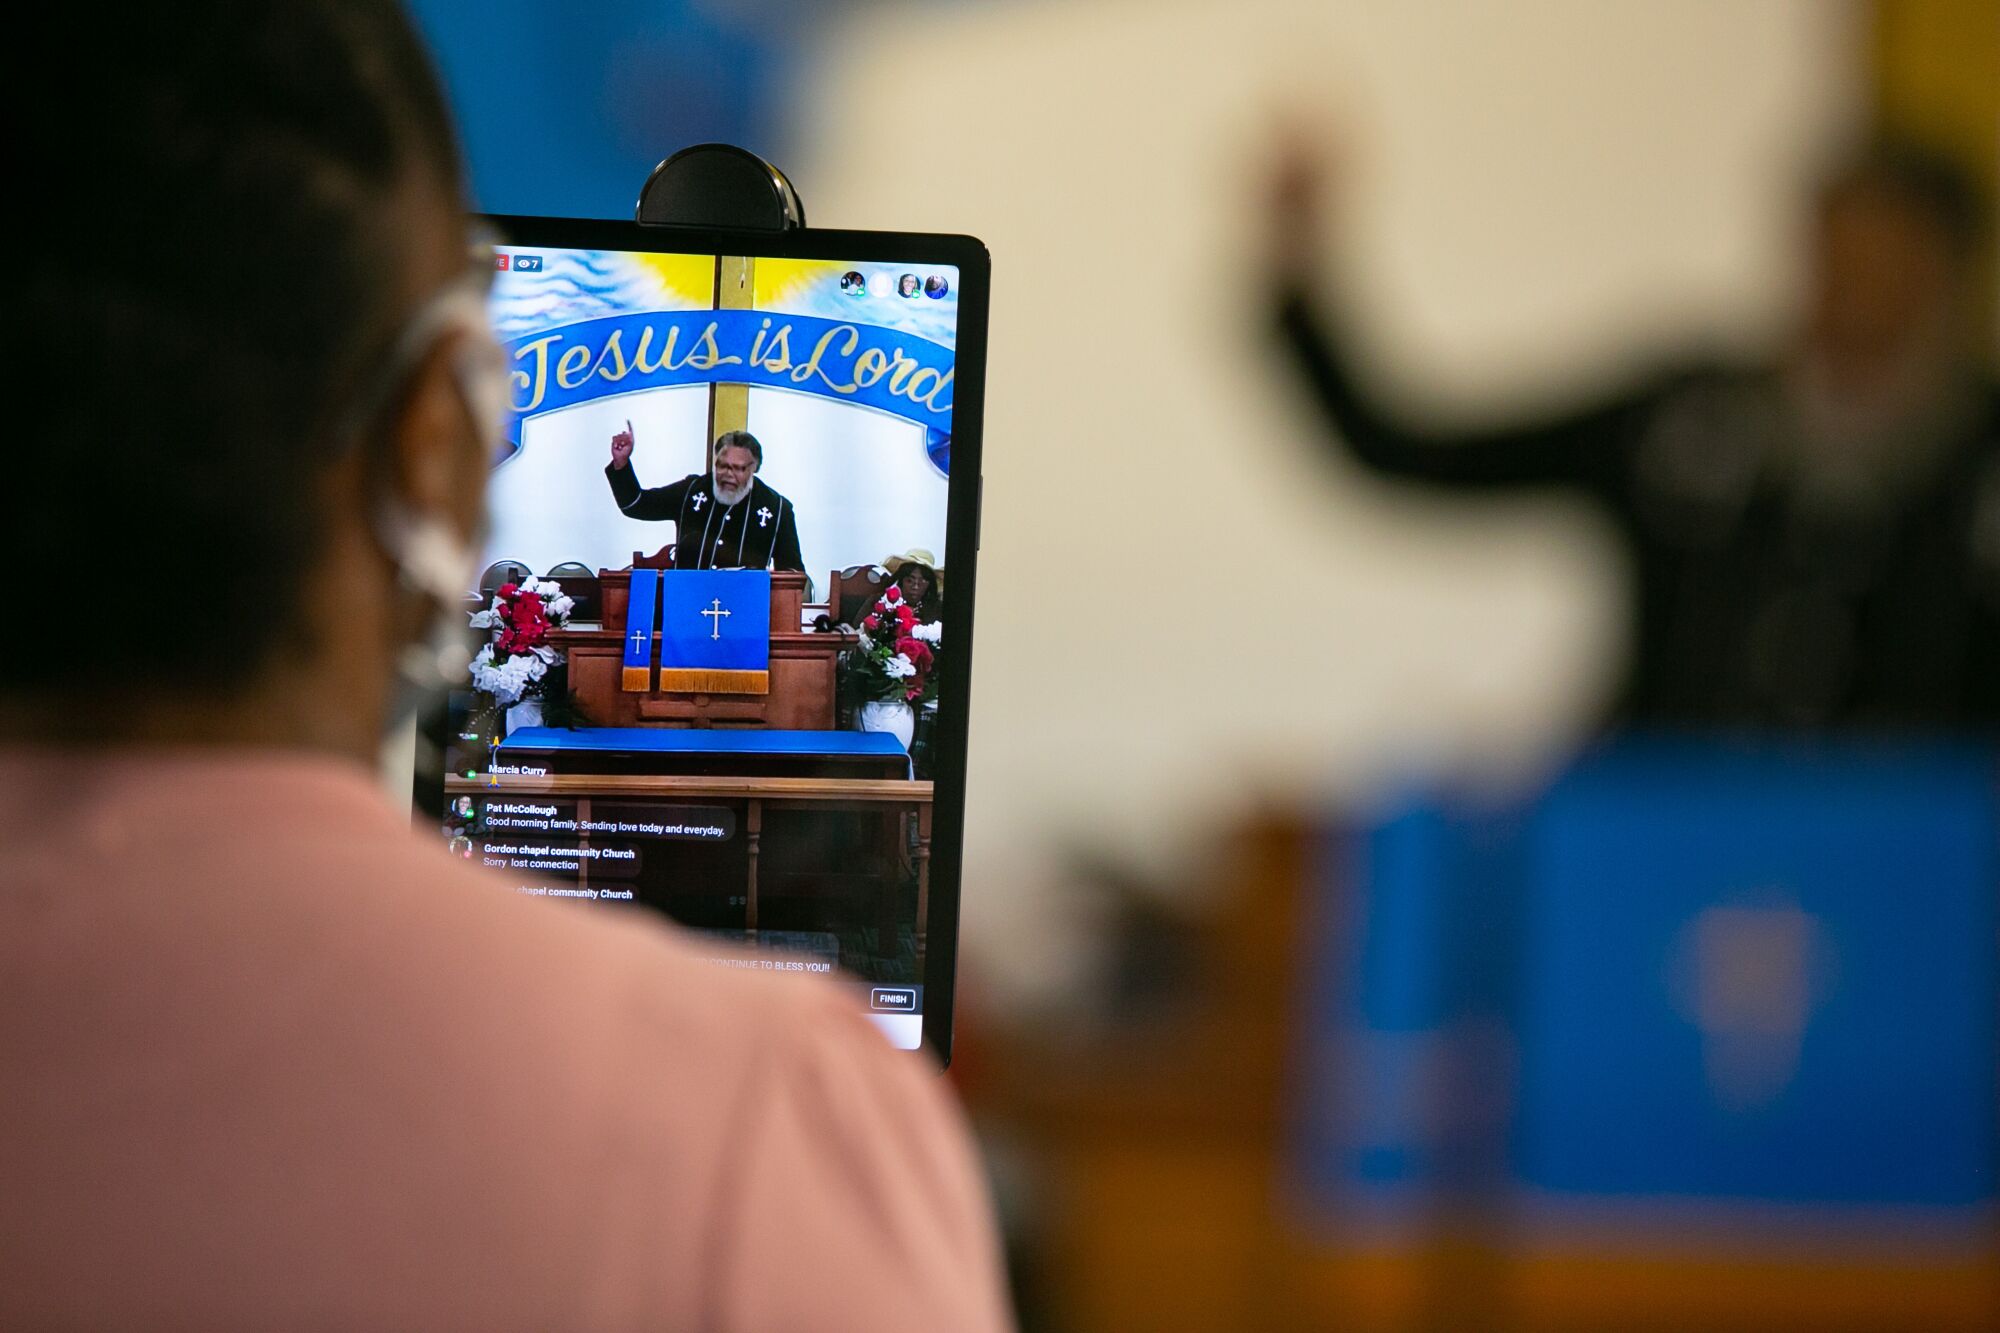 A majority of the members at Gordon Chapel Community Church now attend services virtually.